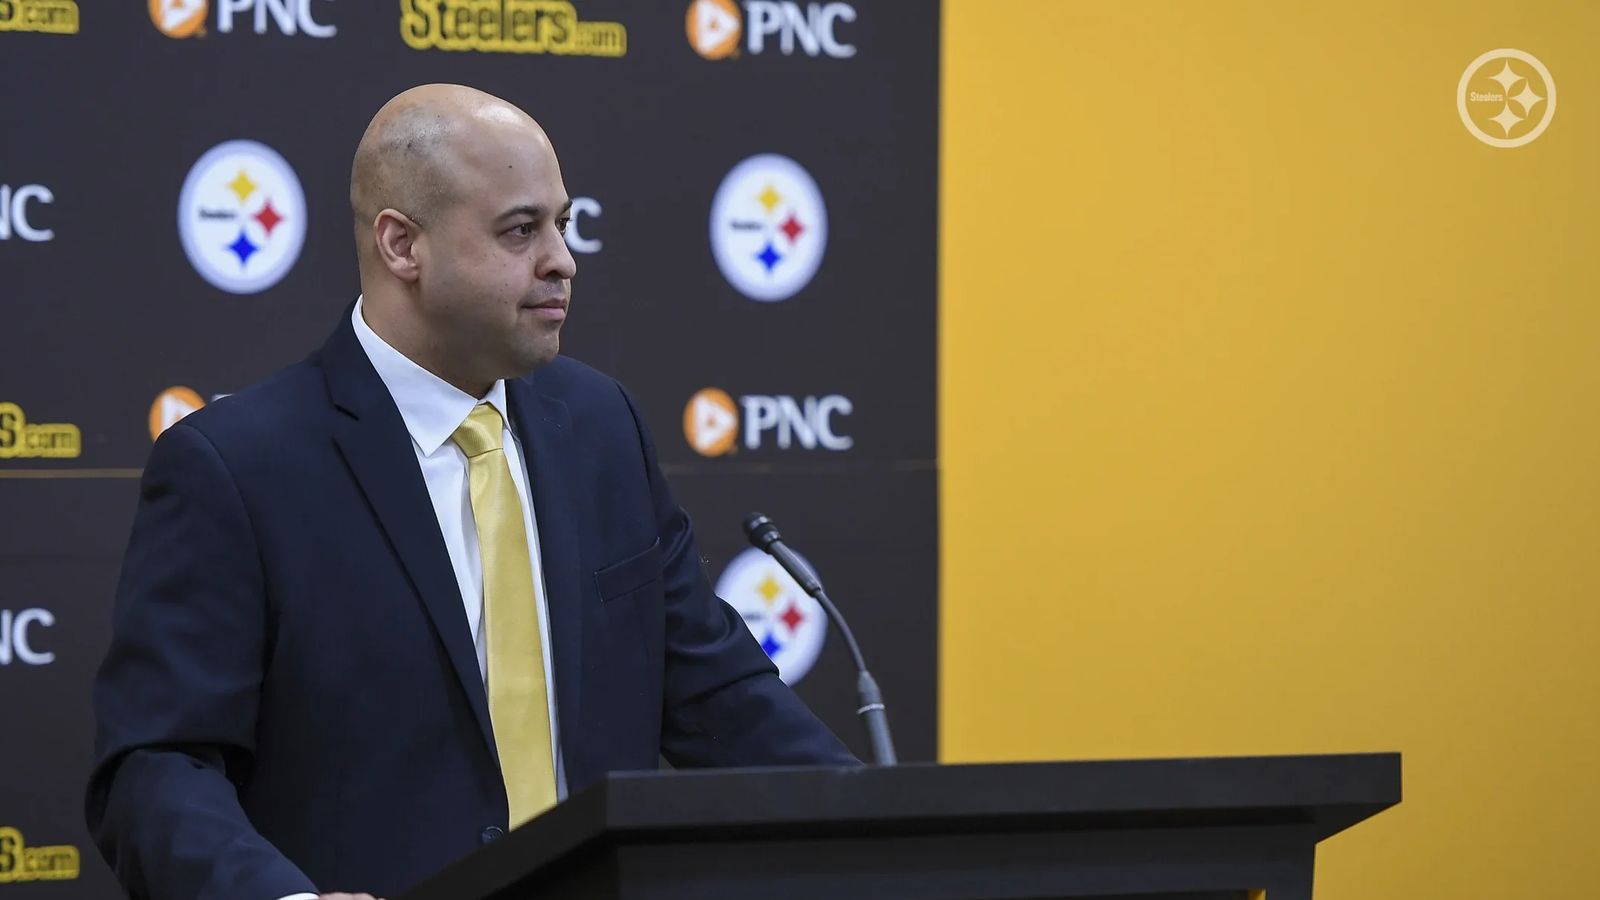 Steelers New Gm Omar Khan Its Been All About Football And Building A Championship Roster Here 